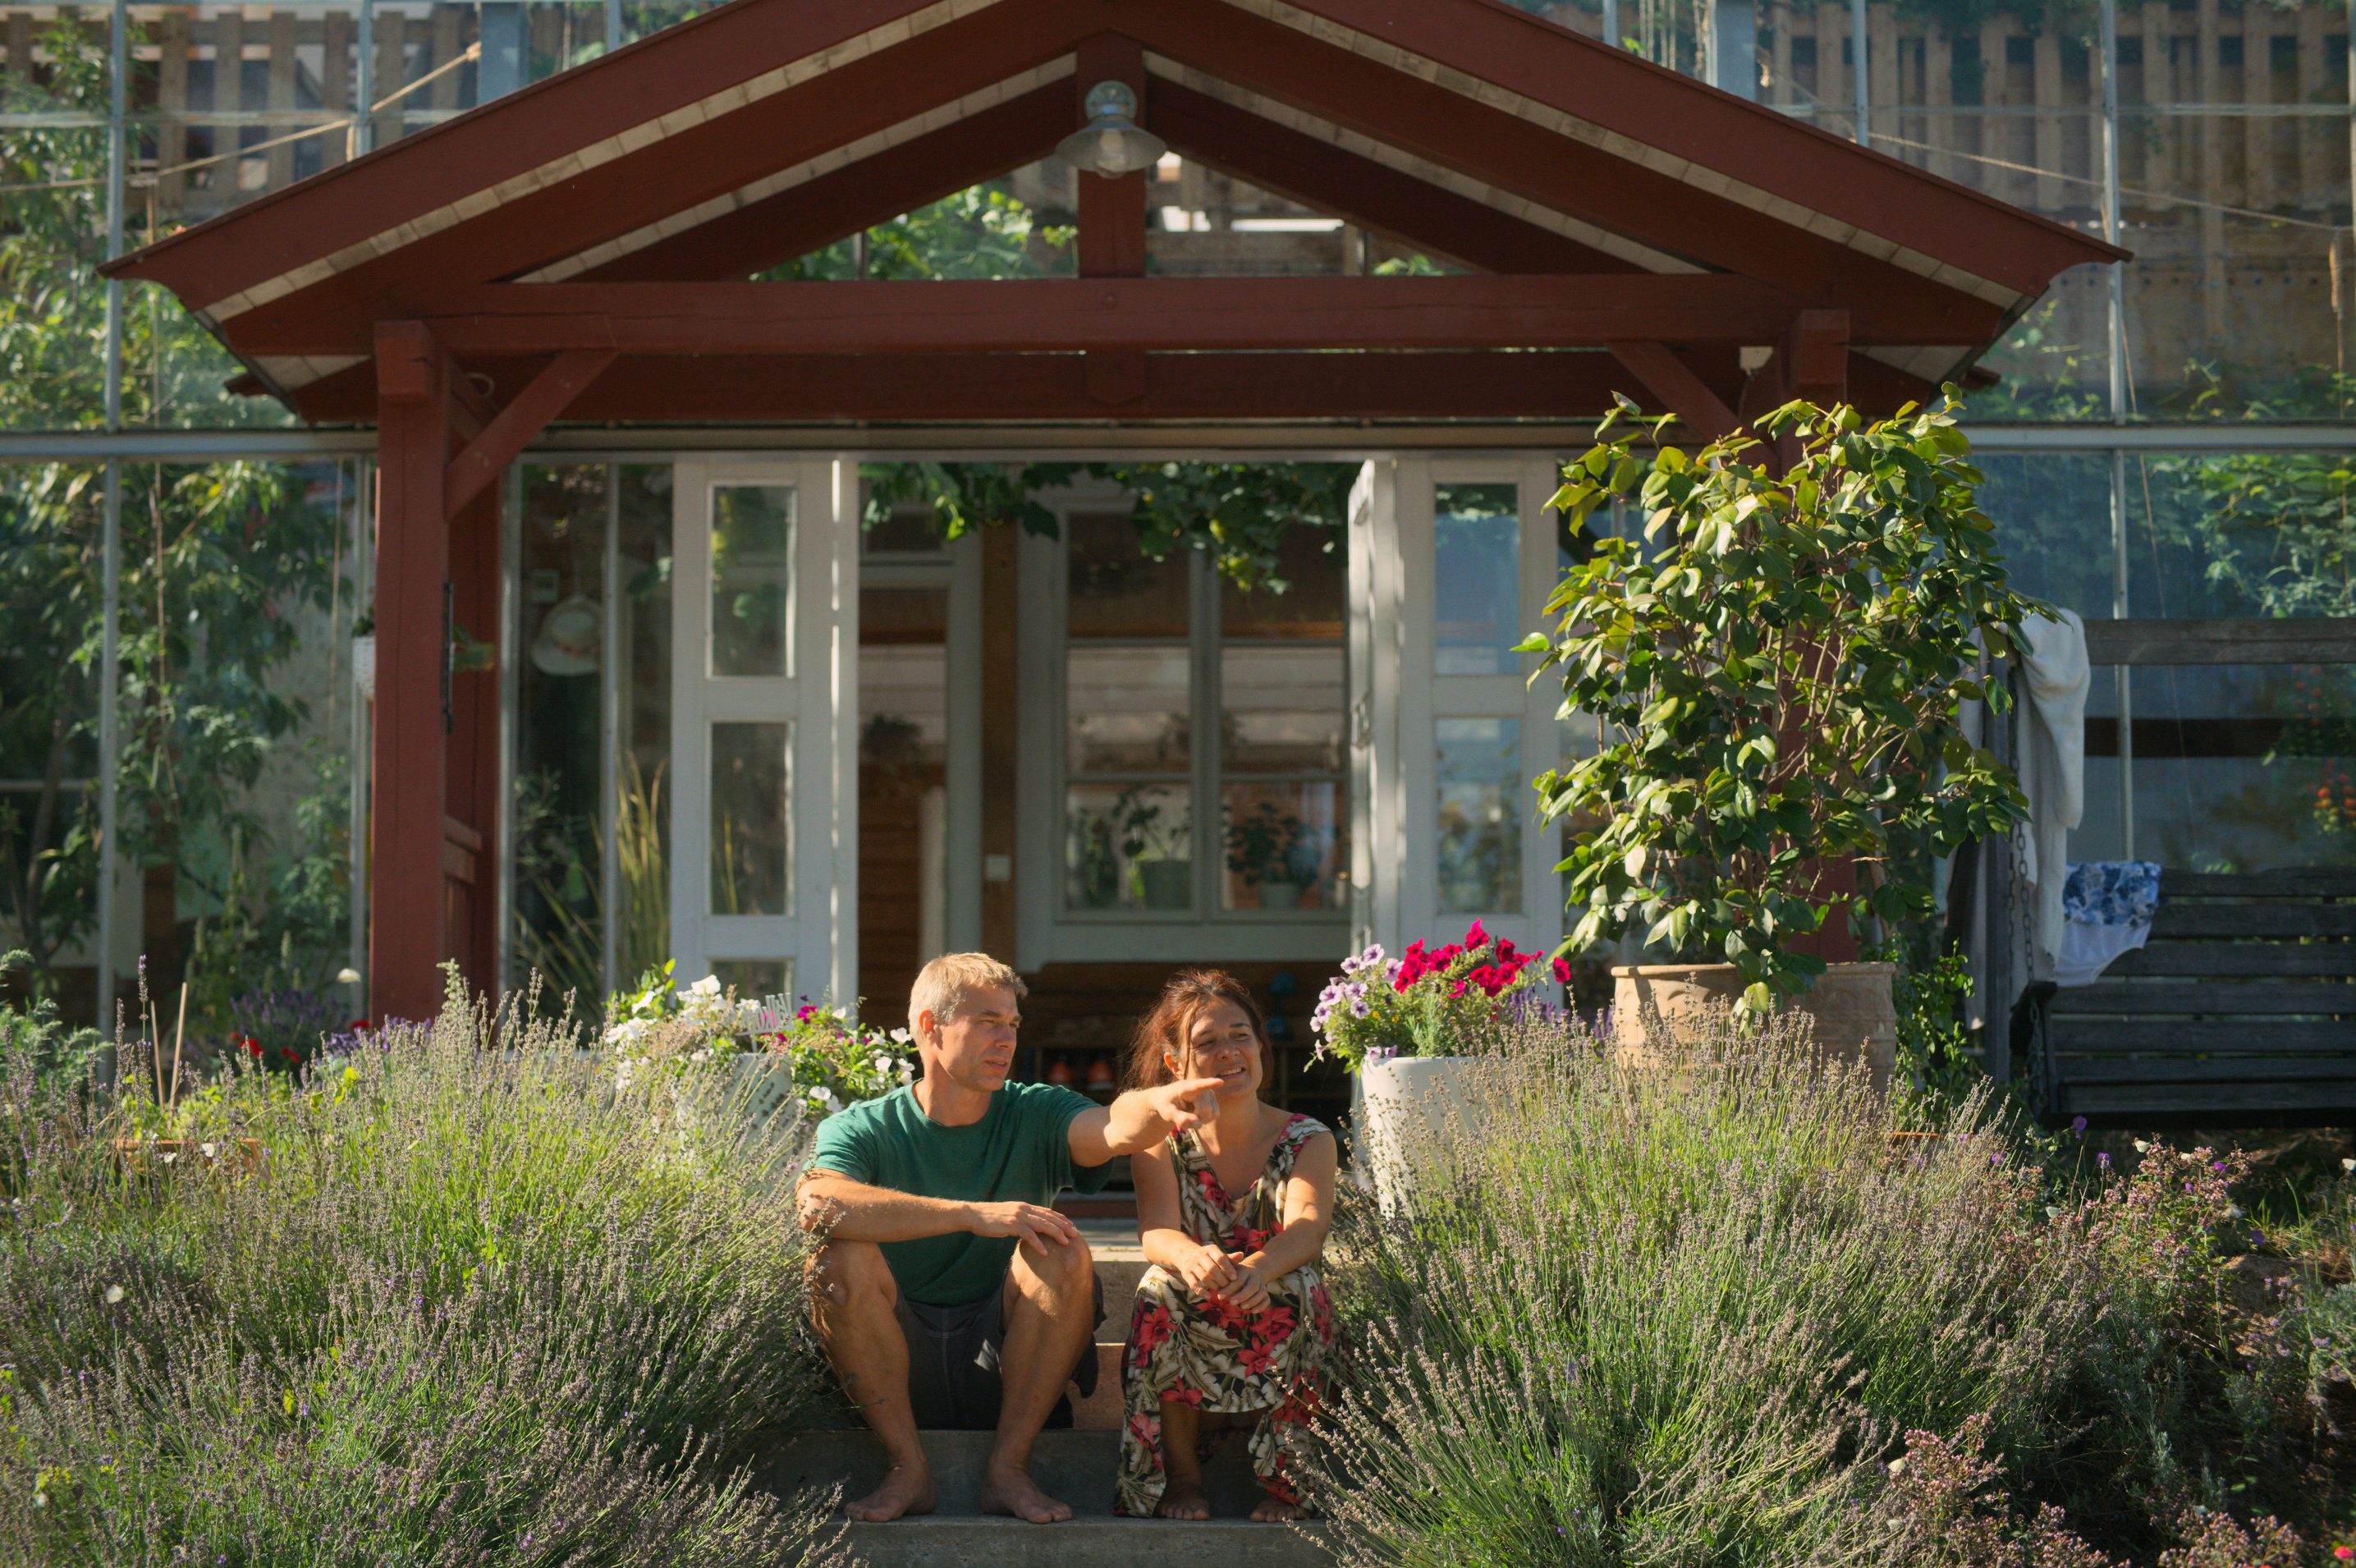 Homeowner Anders Solvarm and his wife in front of their greenhouse home in Sweden. (Courtesy of Apple)